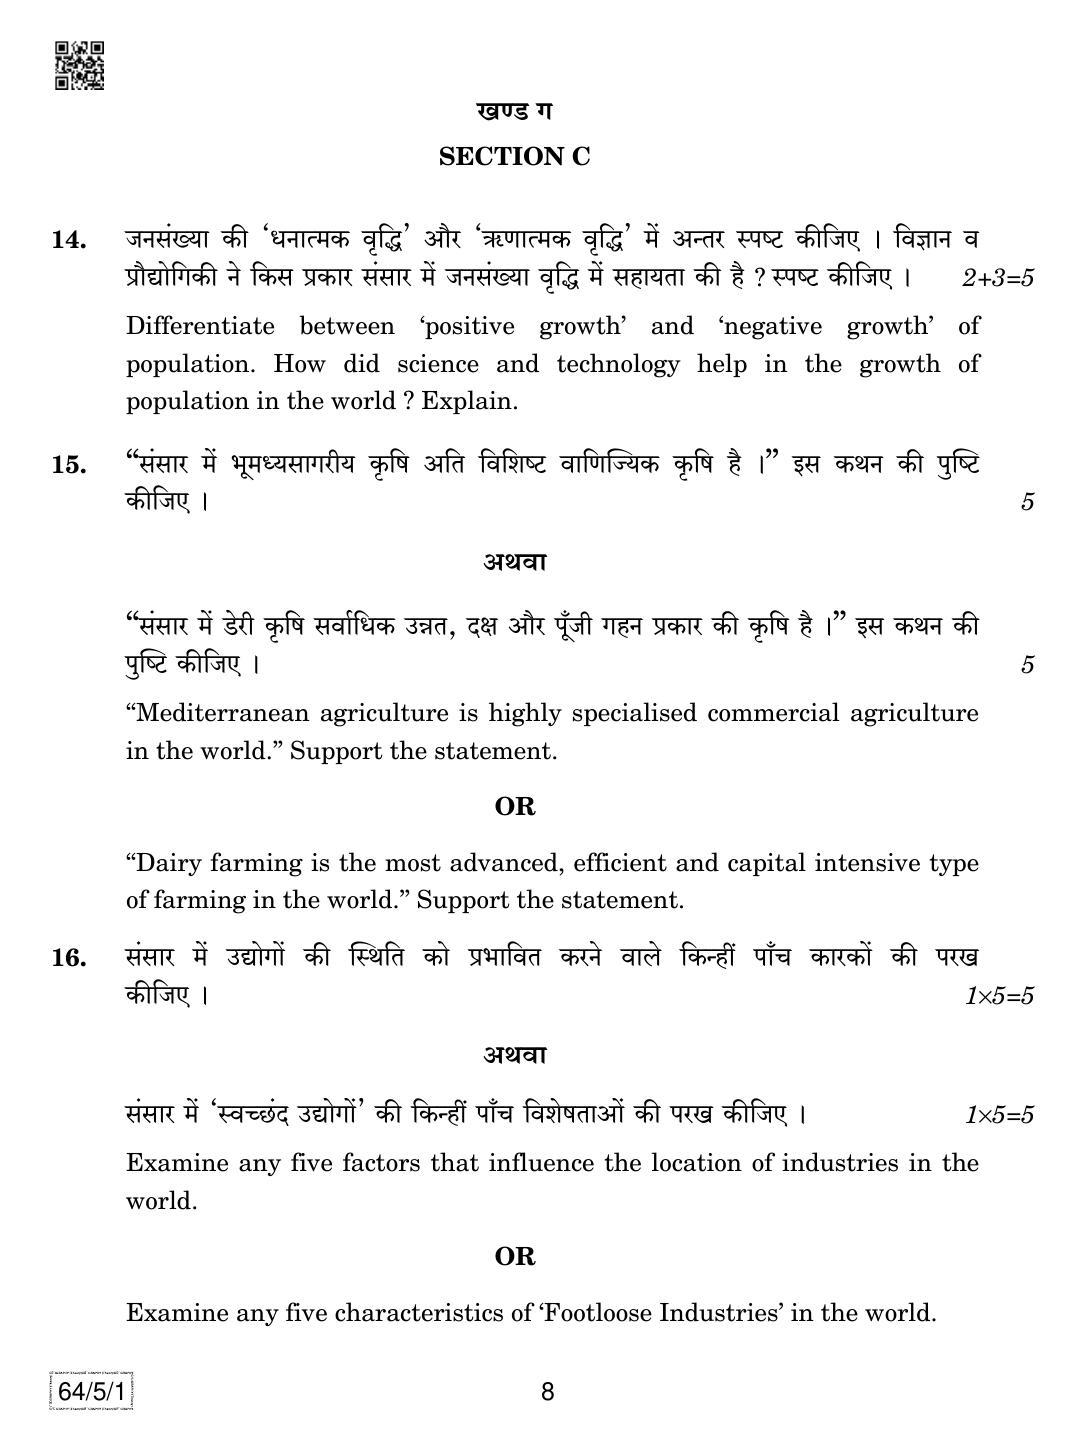 CBSE Class 12 64-5-1 Geography 2019 Question Paper - Page 8